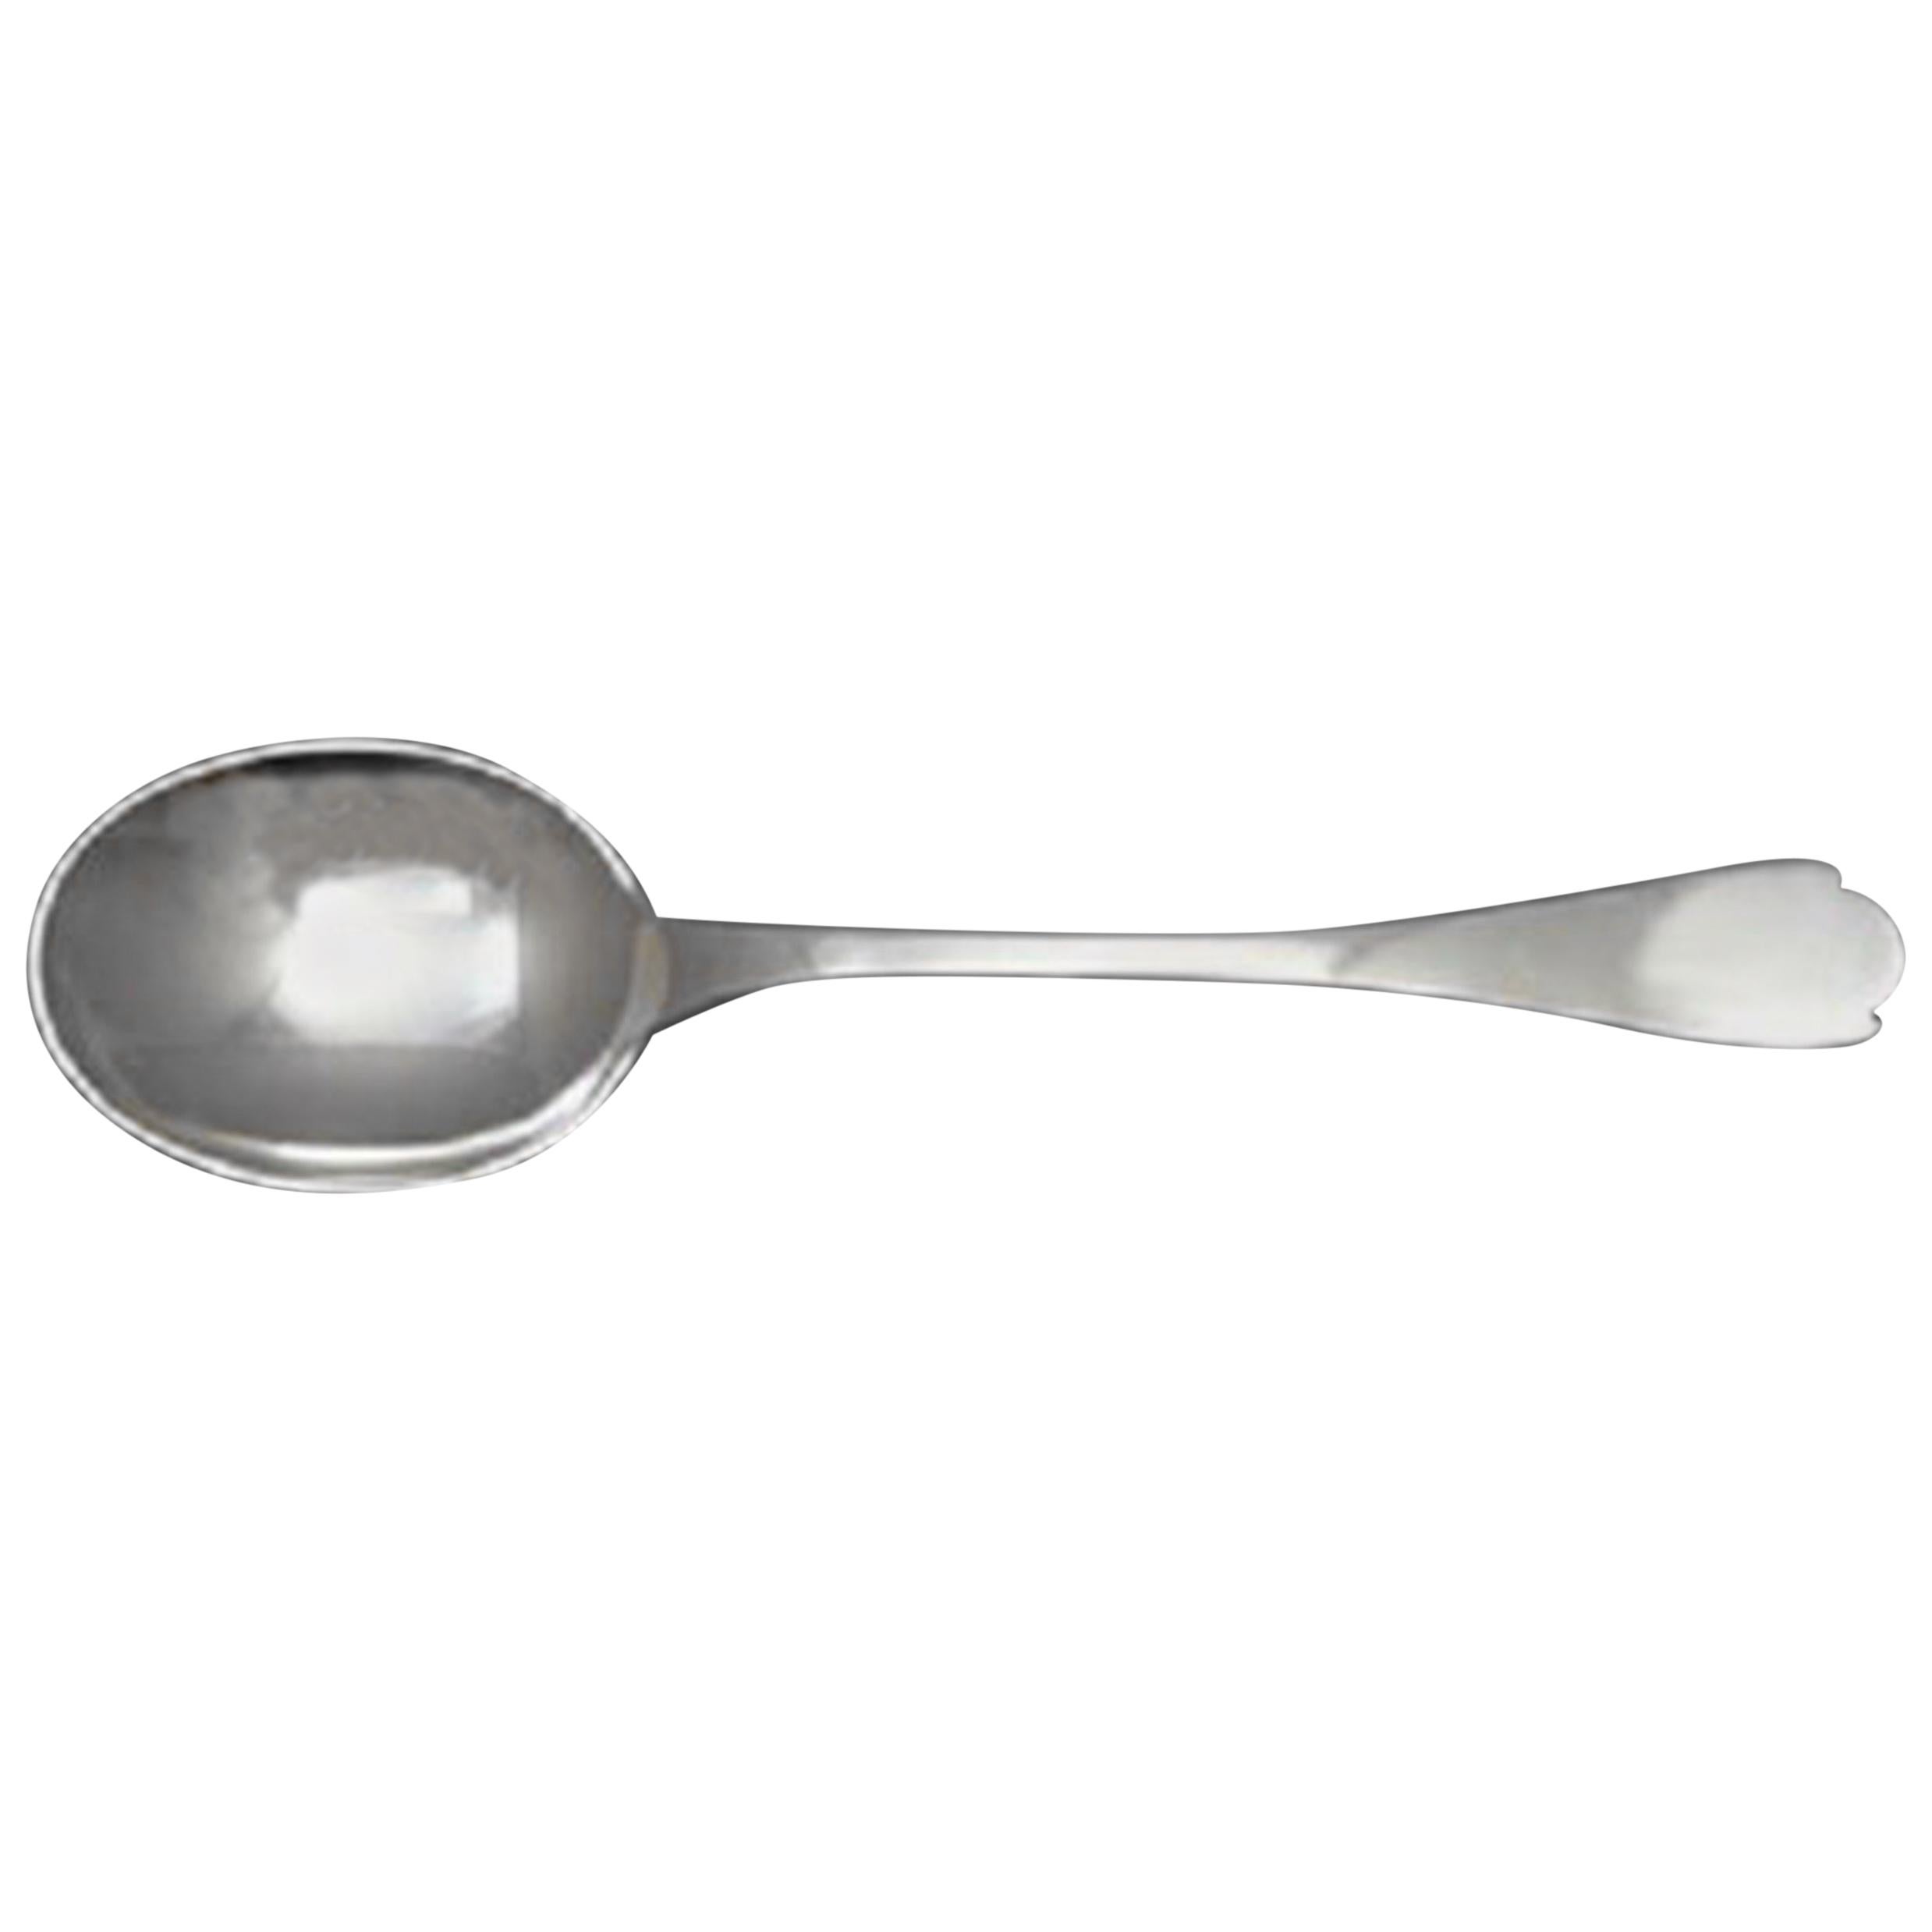 Foxhead by Tiffany & Co. Sterling Silver Cream Soup Spoon